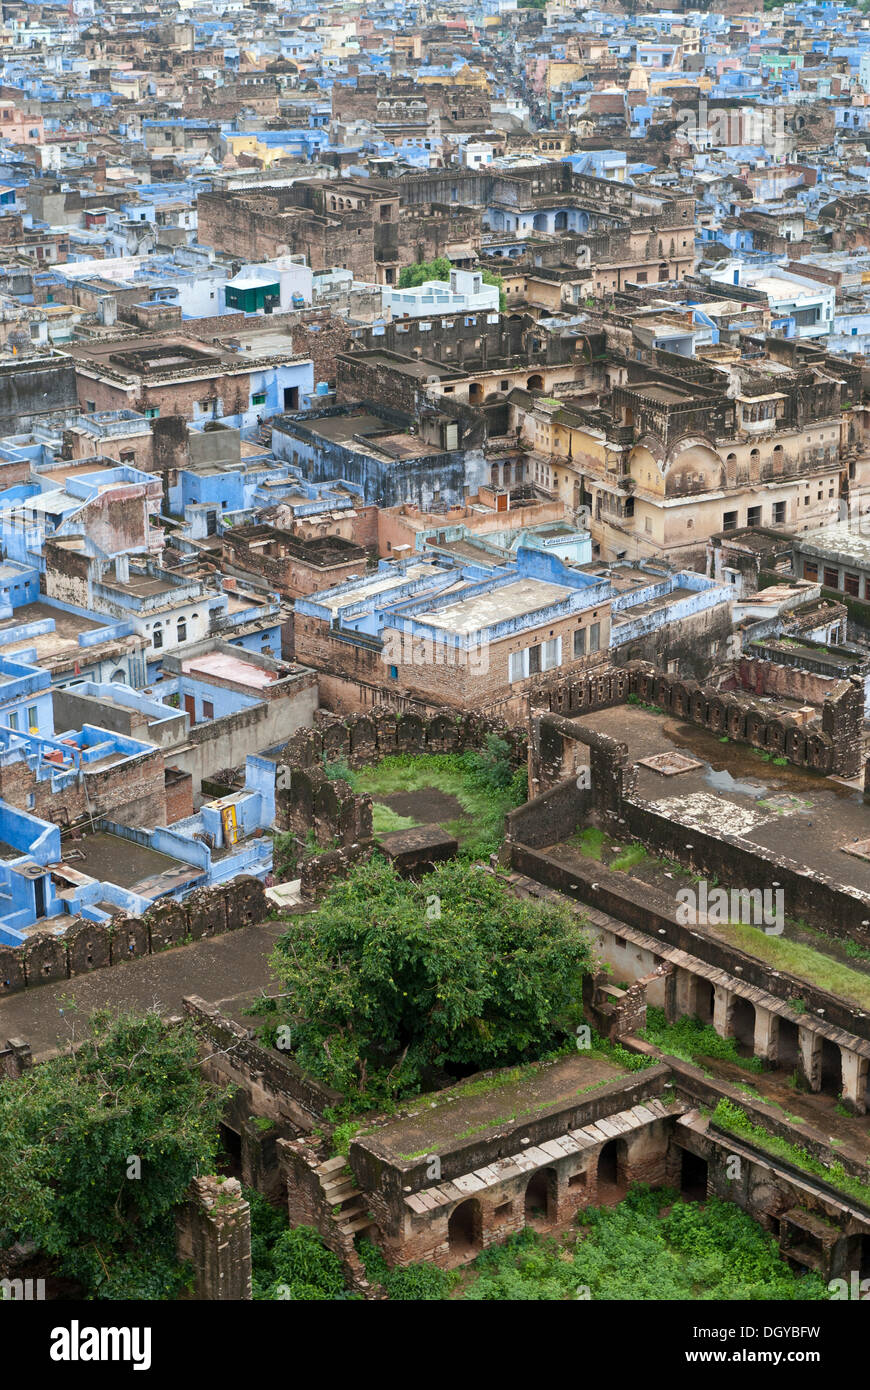 The blue city of Bundi with parts of the Palace in front, Bundi, Rajasthan, India, Asia Stock Photo